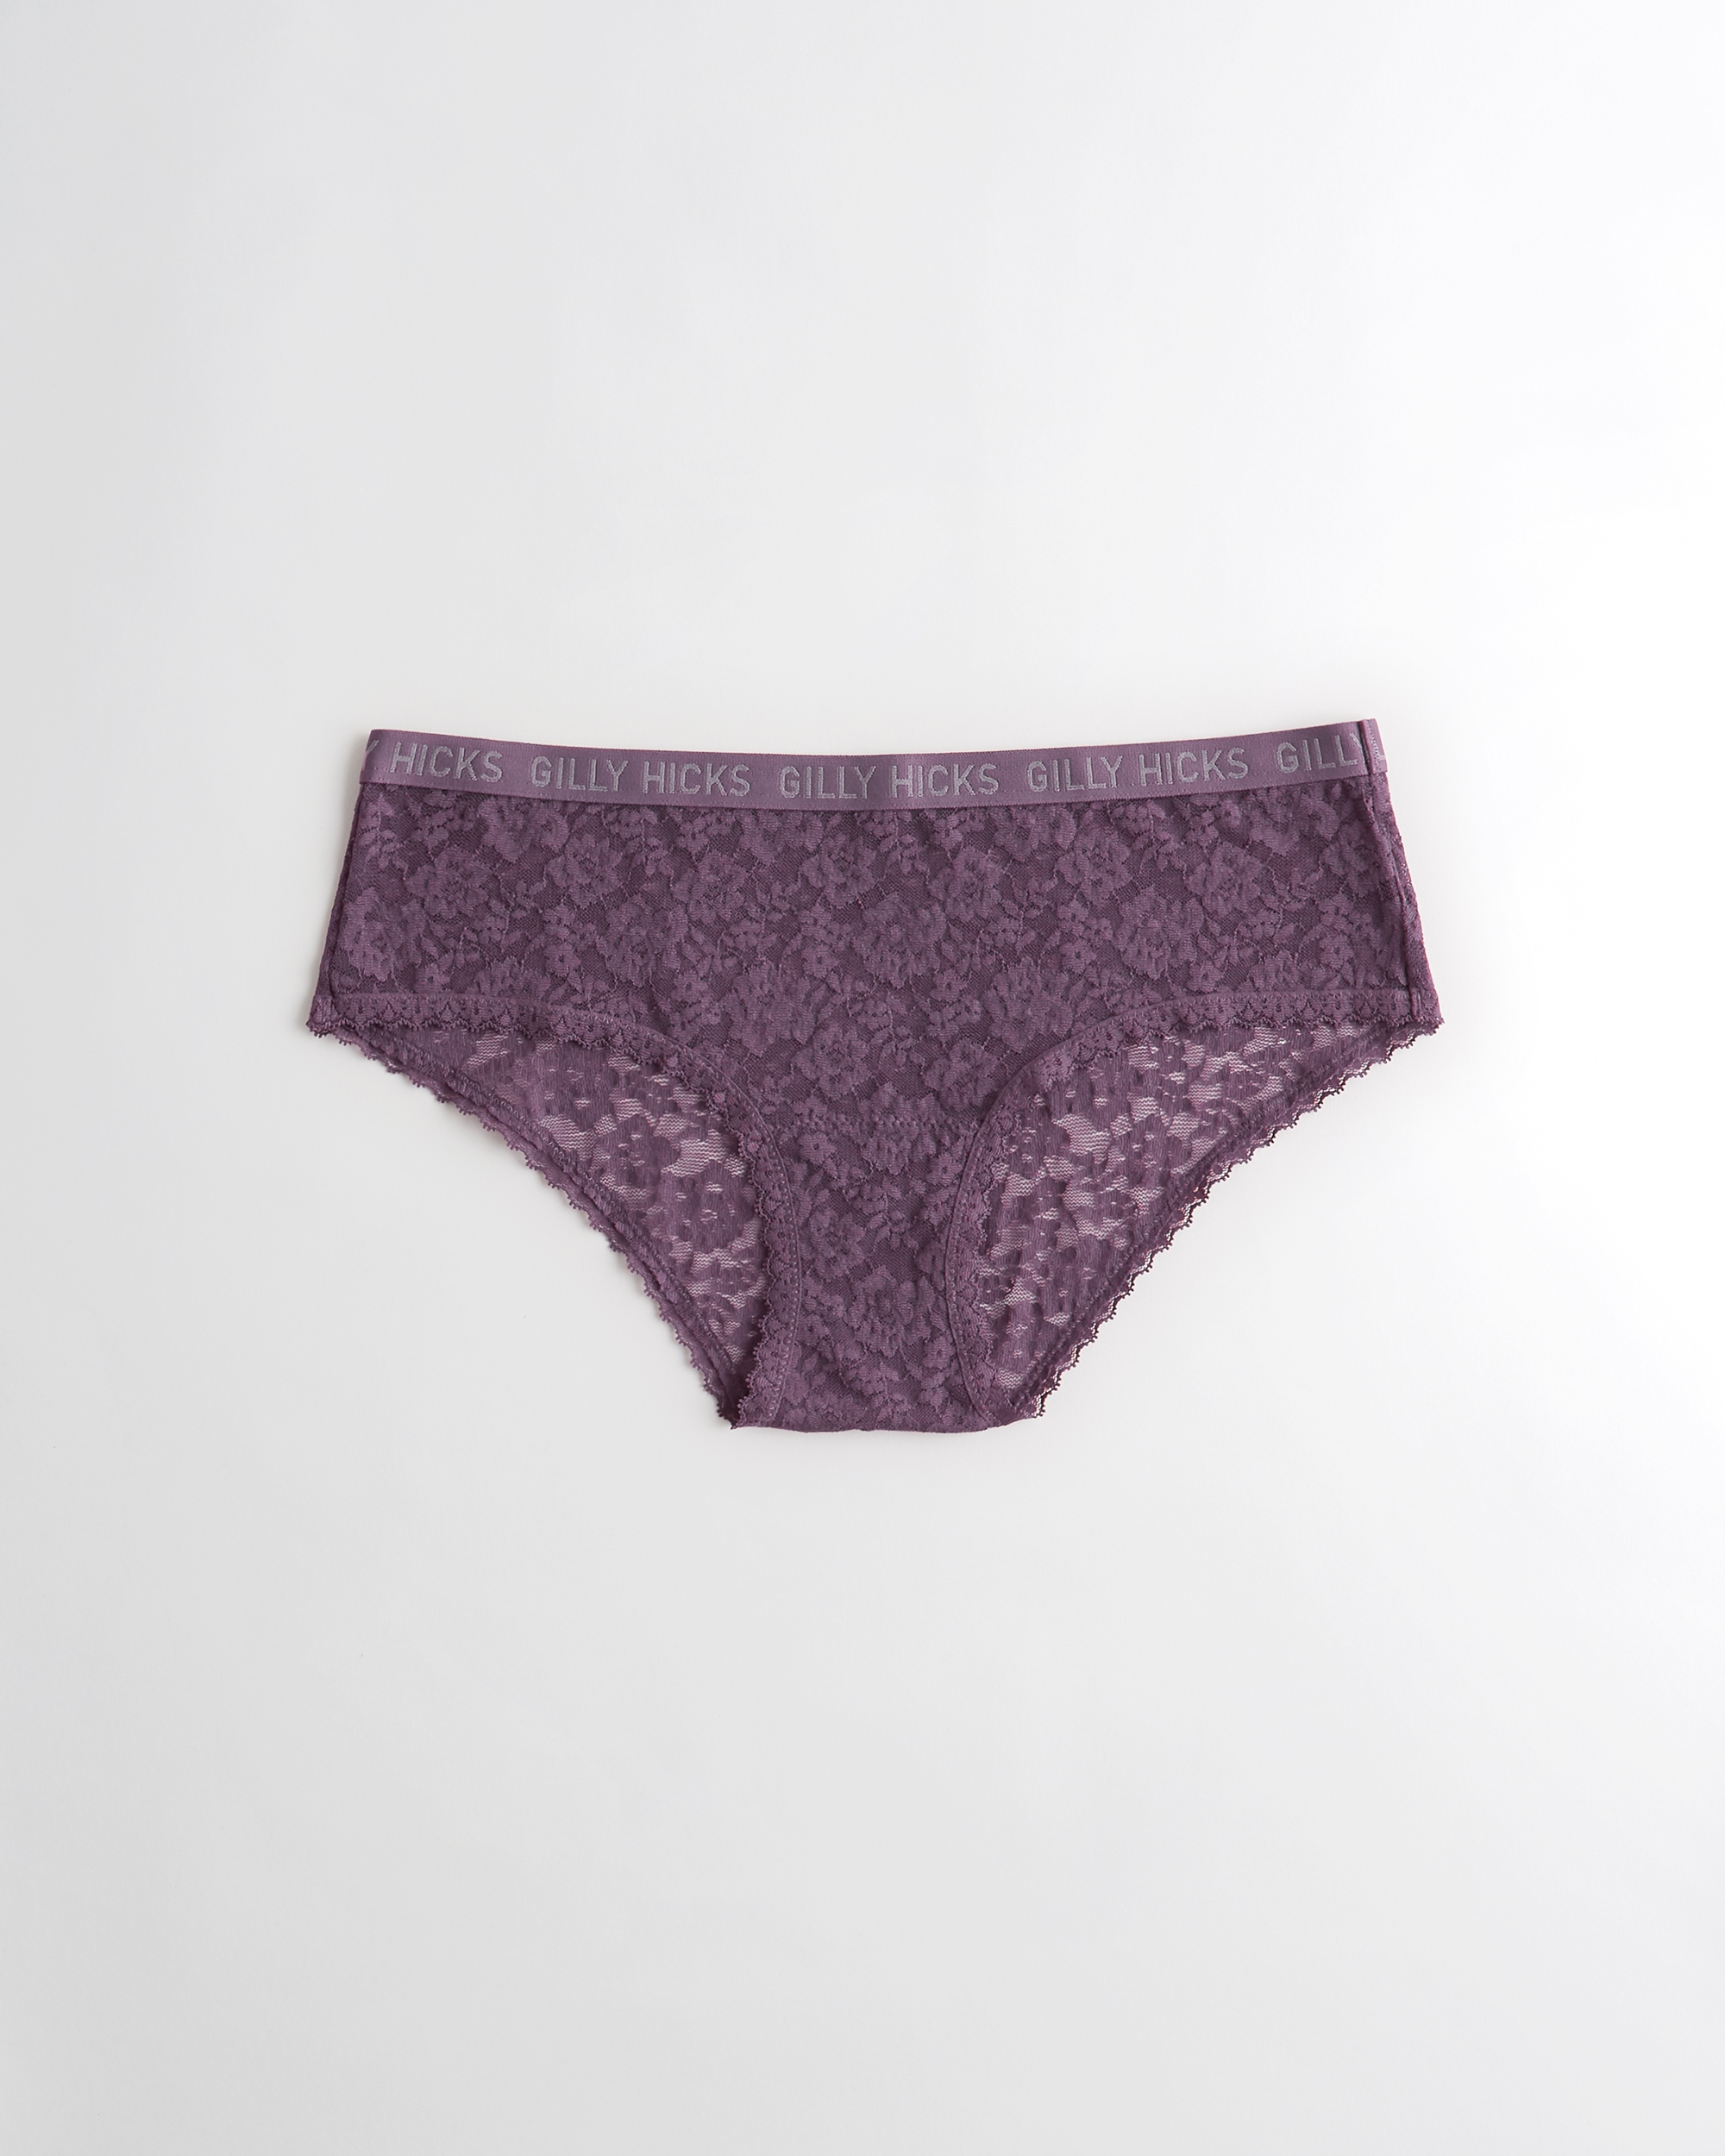 Girls Underwear and Panties | Gilly Hicks - Hollister Co.